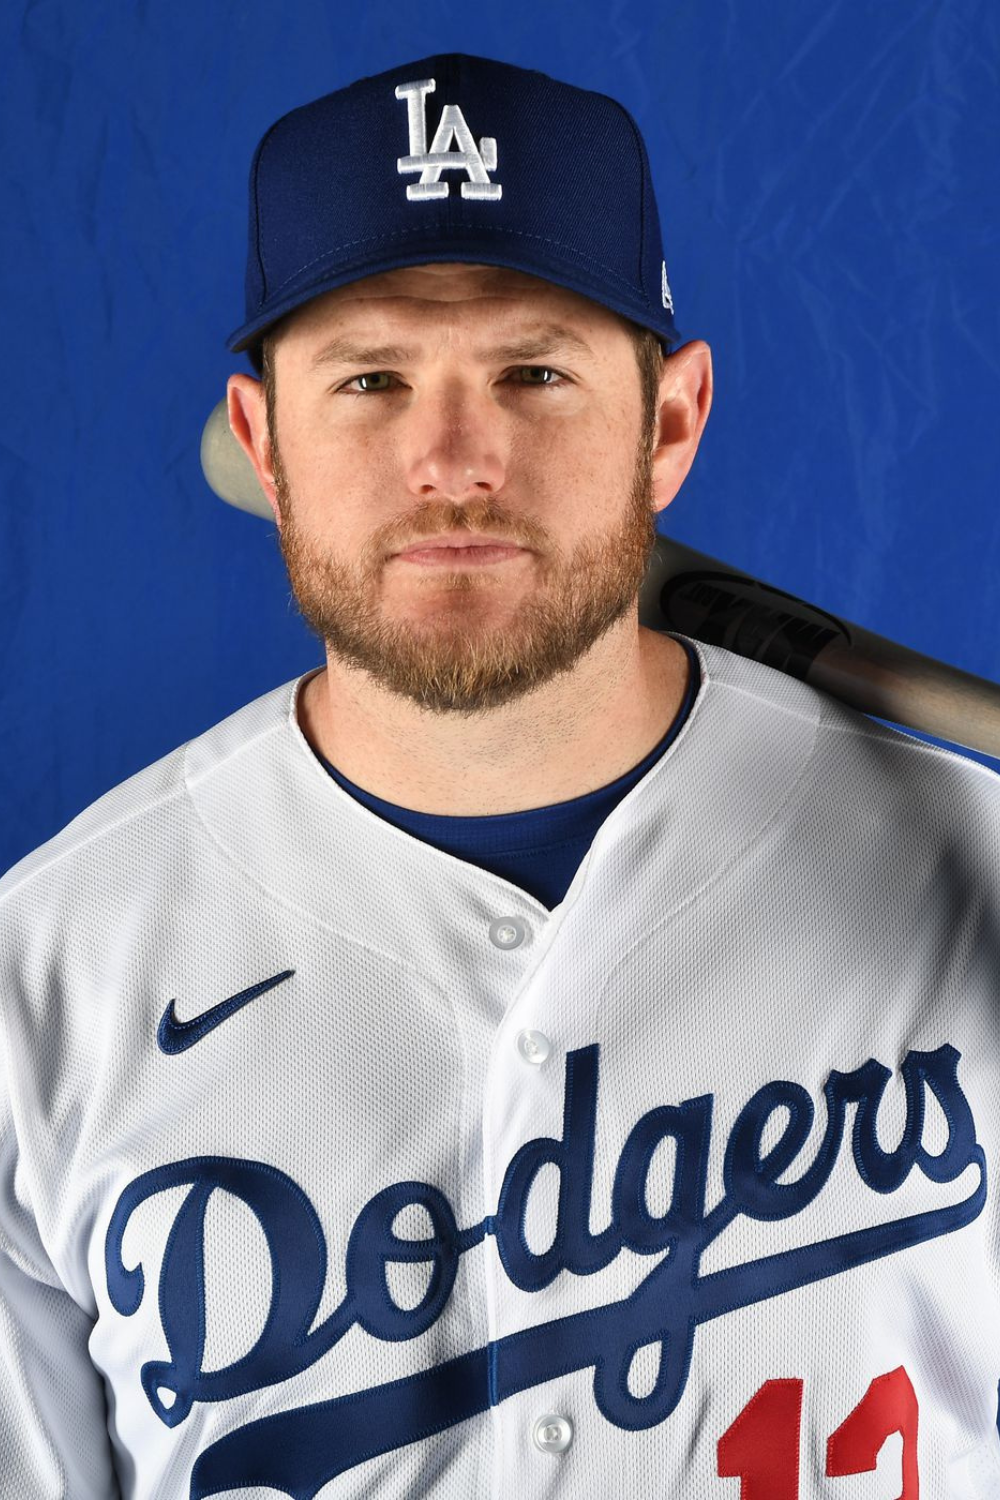 Max Muncy of the dodgers